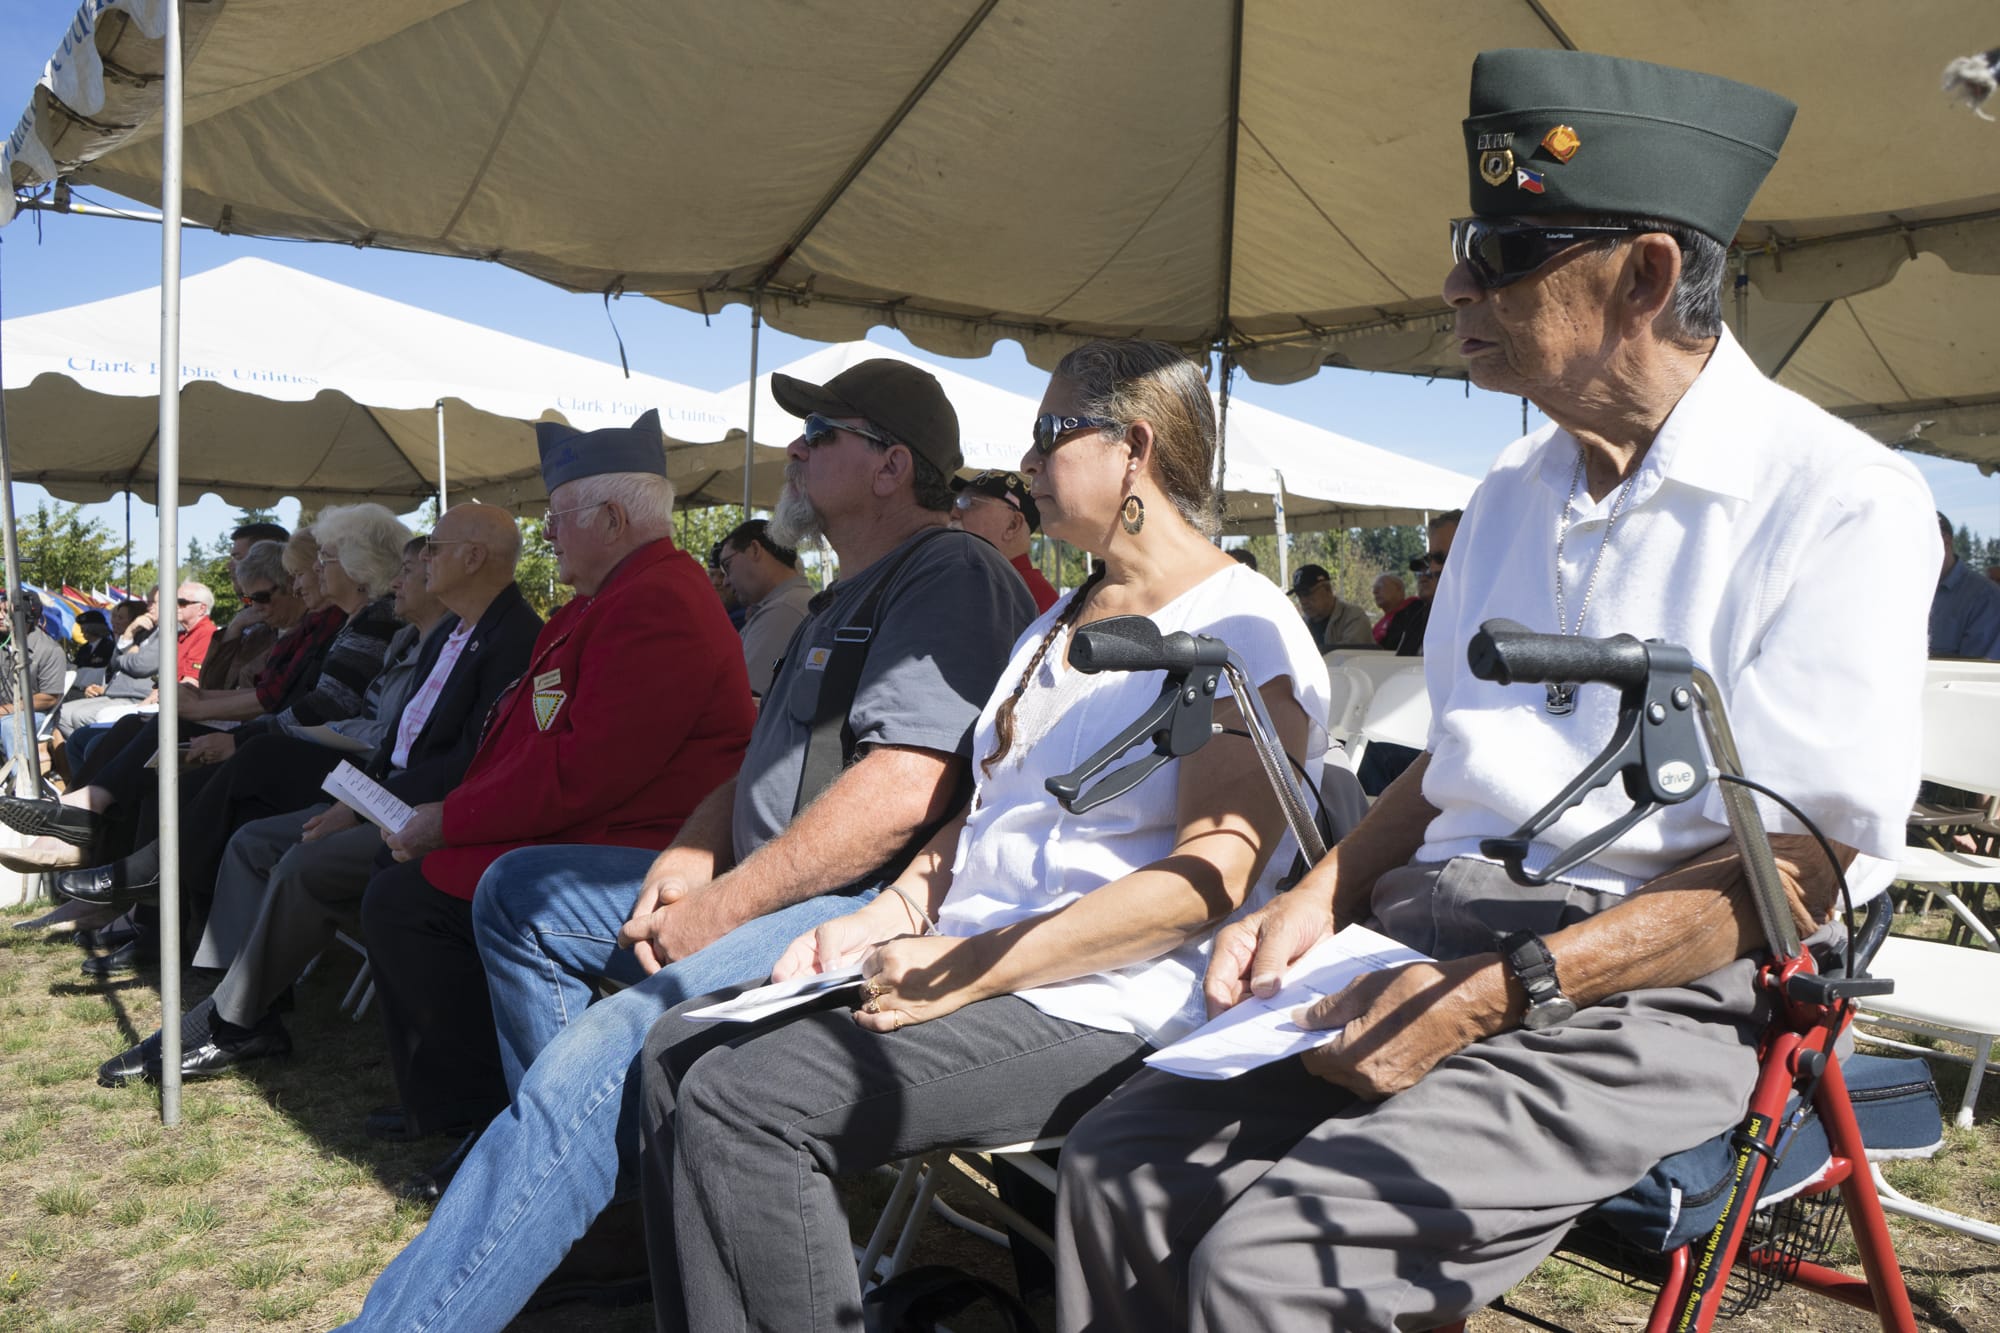 Robert H. Navarette, right, a World War II veteran, listens to speakers at the POW/MIA Recognition Day Observance at the Armed Forces Reserve Center in Vancouver on Saturday, Sept. 19, 2015.